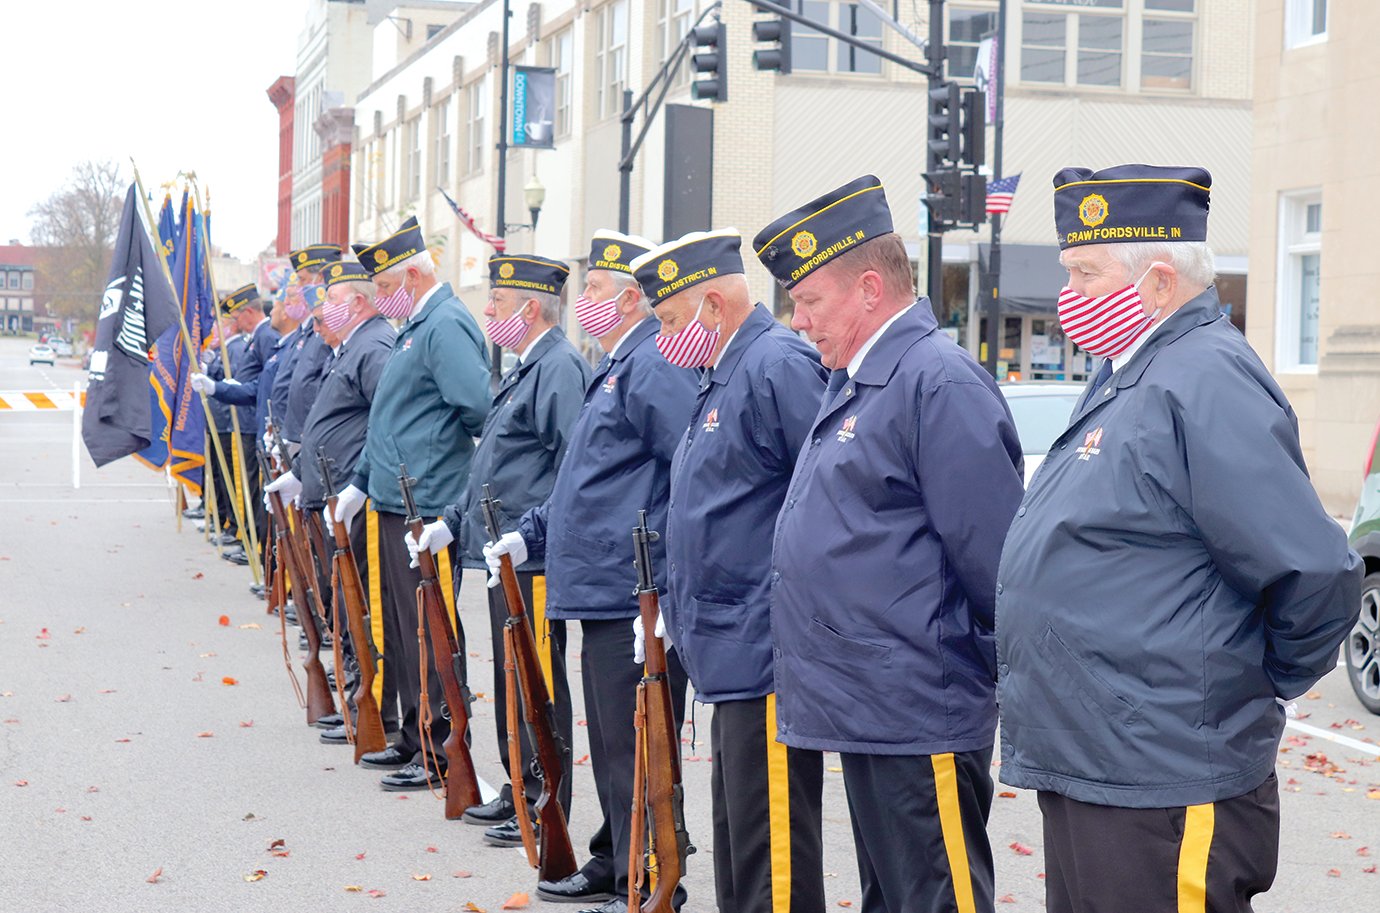 Members of the Crawfordsville Honor Guard bow their heads for a moment of silence in rememberance of the fallen Wednesday on Green Street.